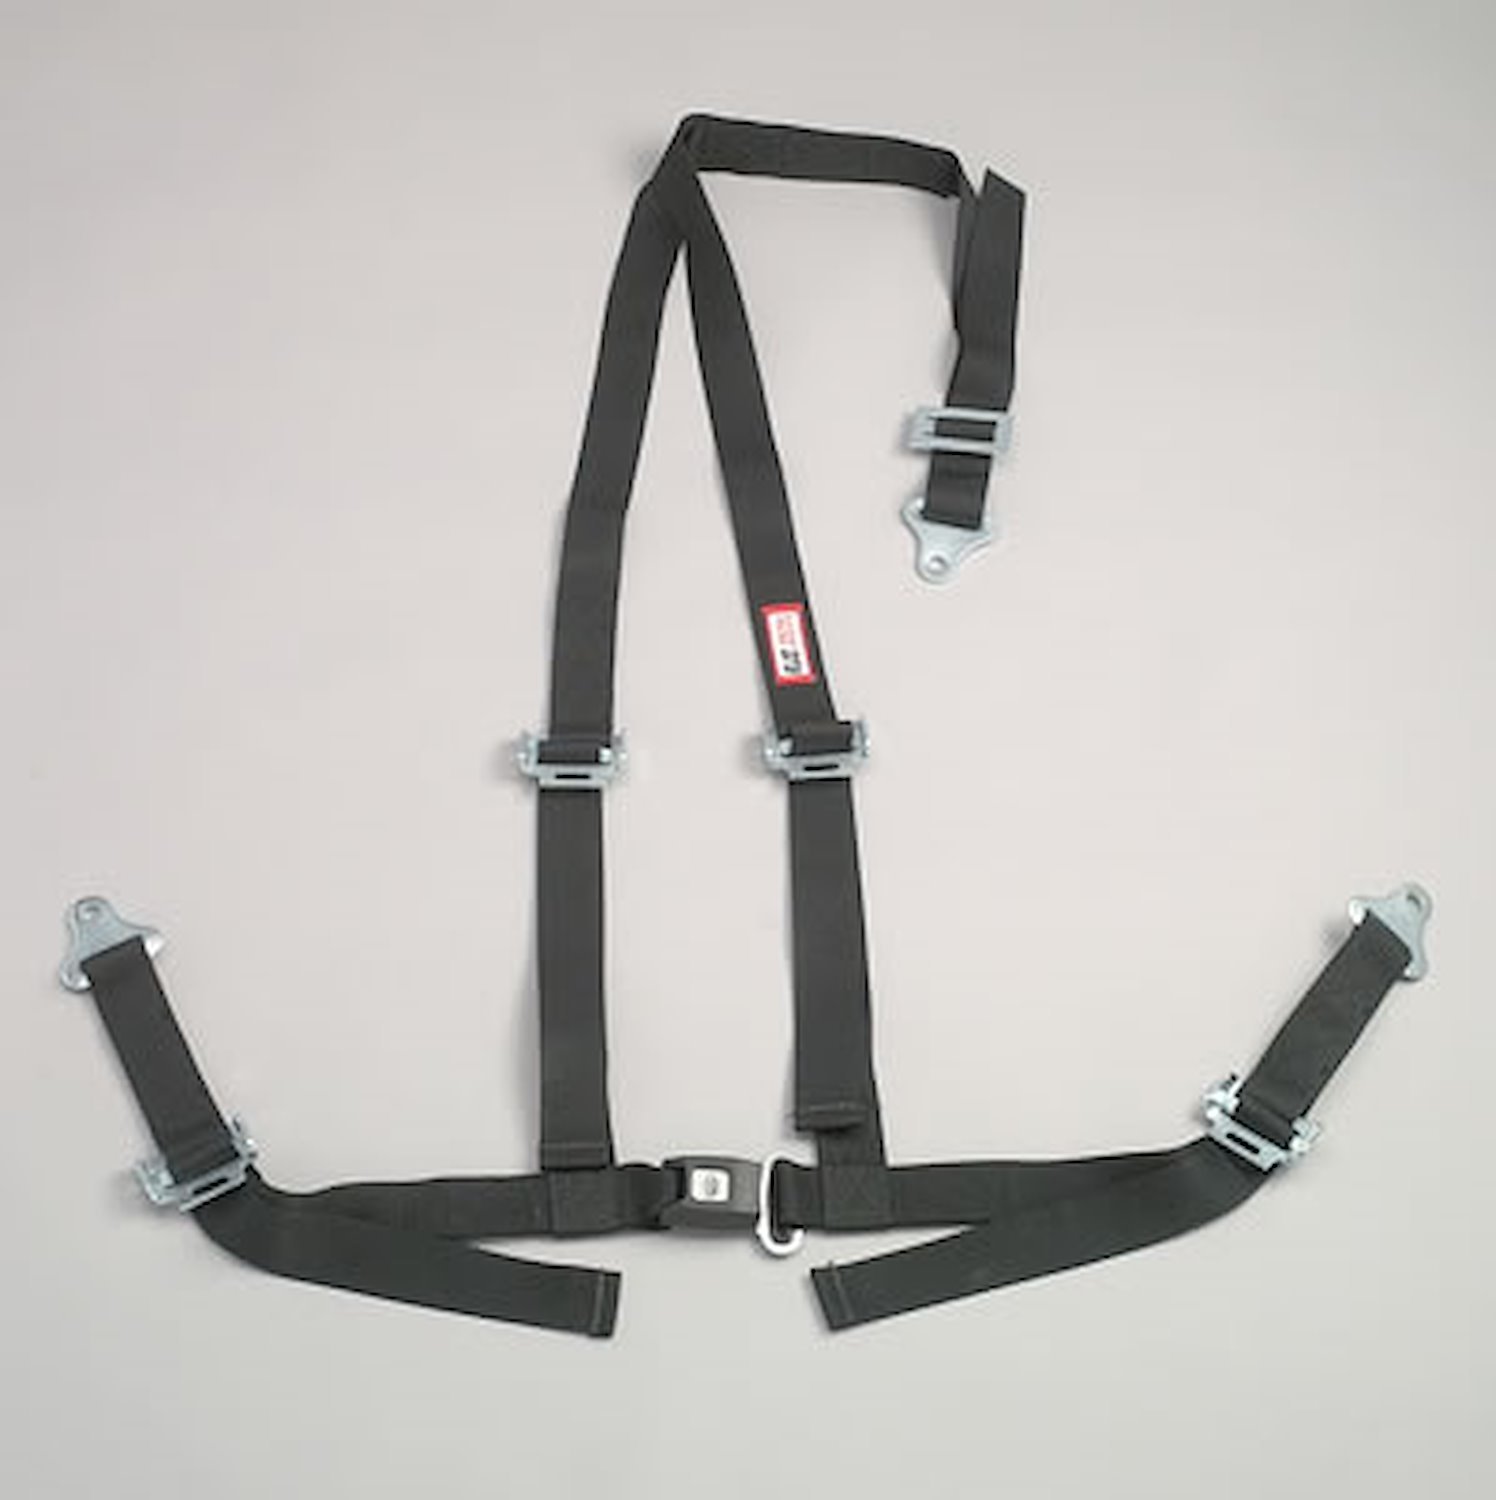 NON-SFI B&T HARNESS 2 PULL UP Lap Belt 2 S. H. Individual FLOOR Mount ALL WRAP ENDS w/STERNUM STRAP ORANGE